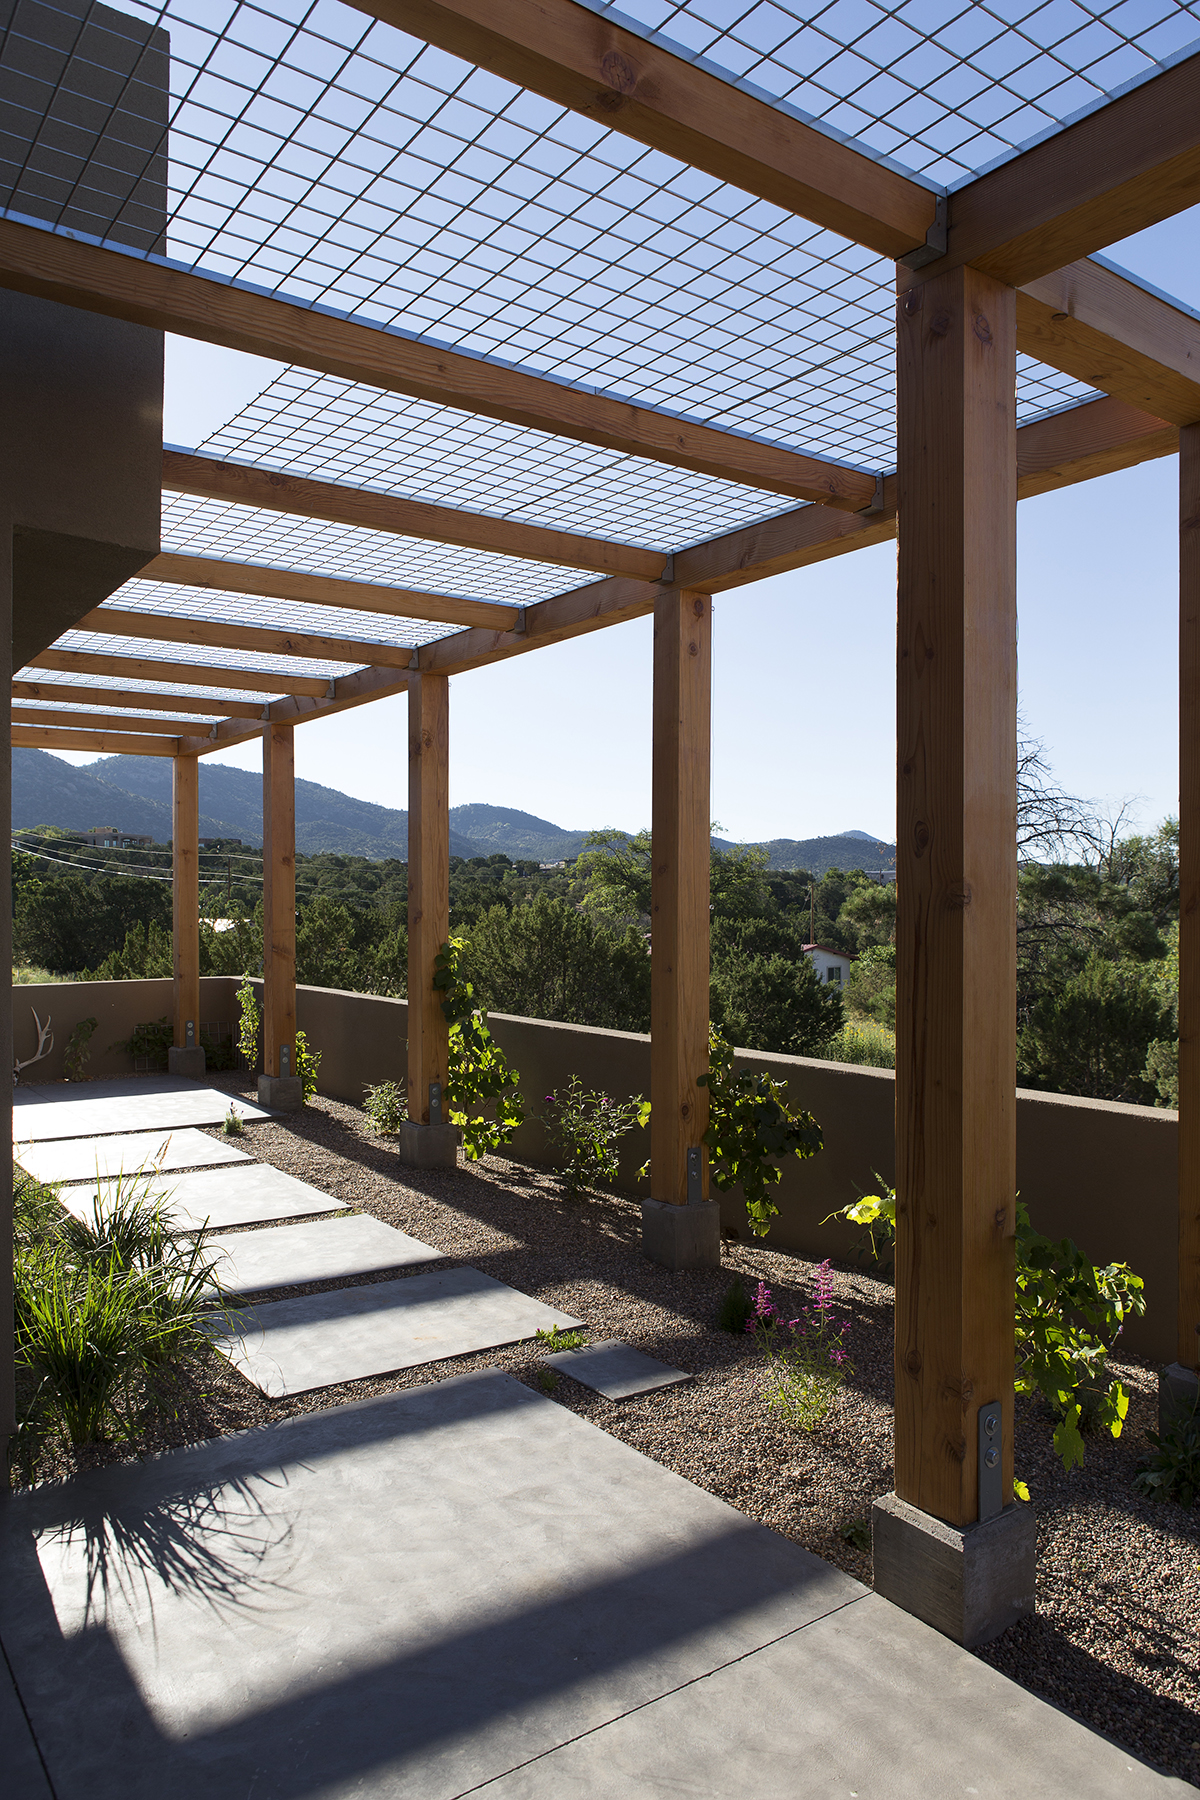 A wooden deck with a pergola designed and built by an architect.